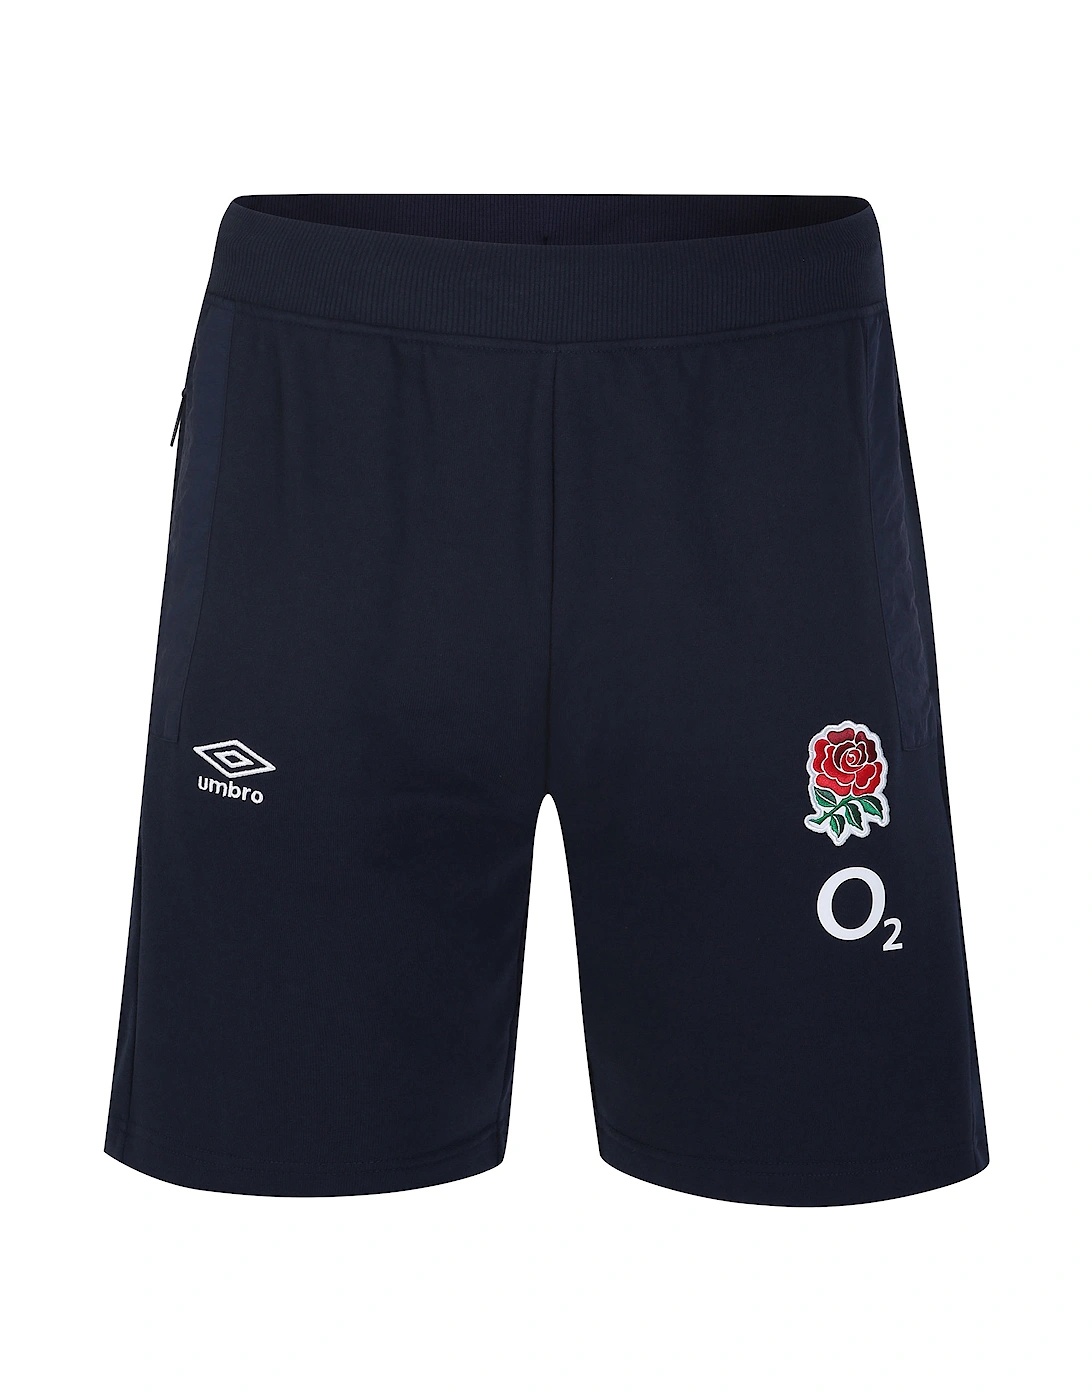 Mens 23/24 Fleece England Rugby Shorts, 5 of 4